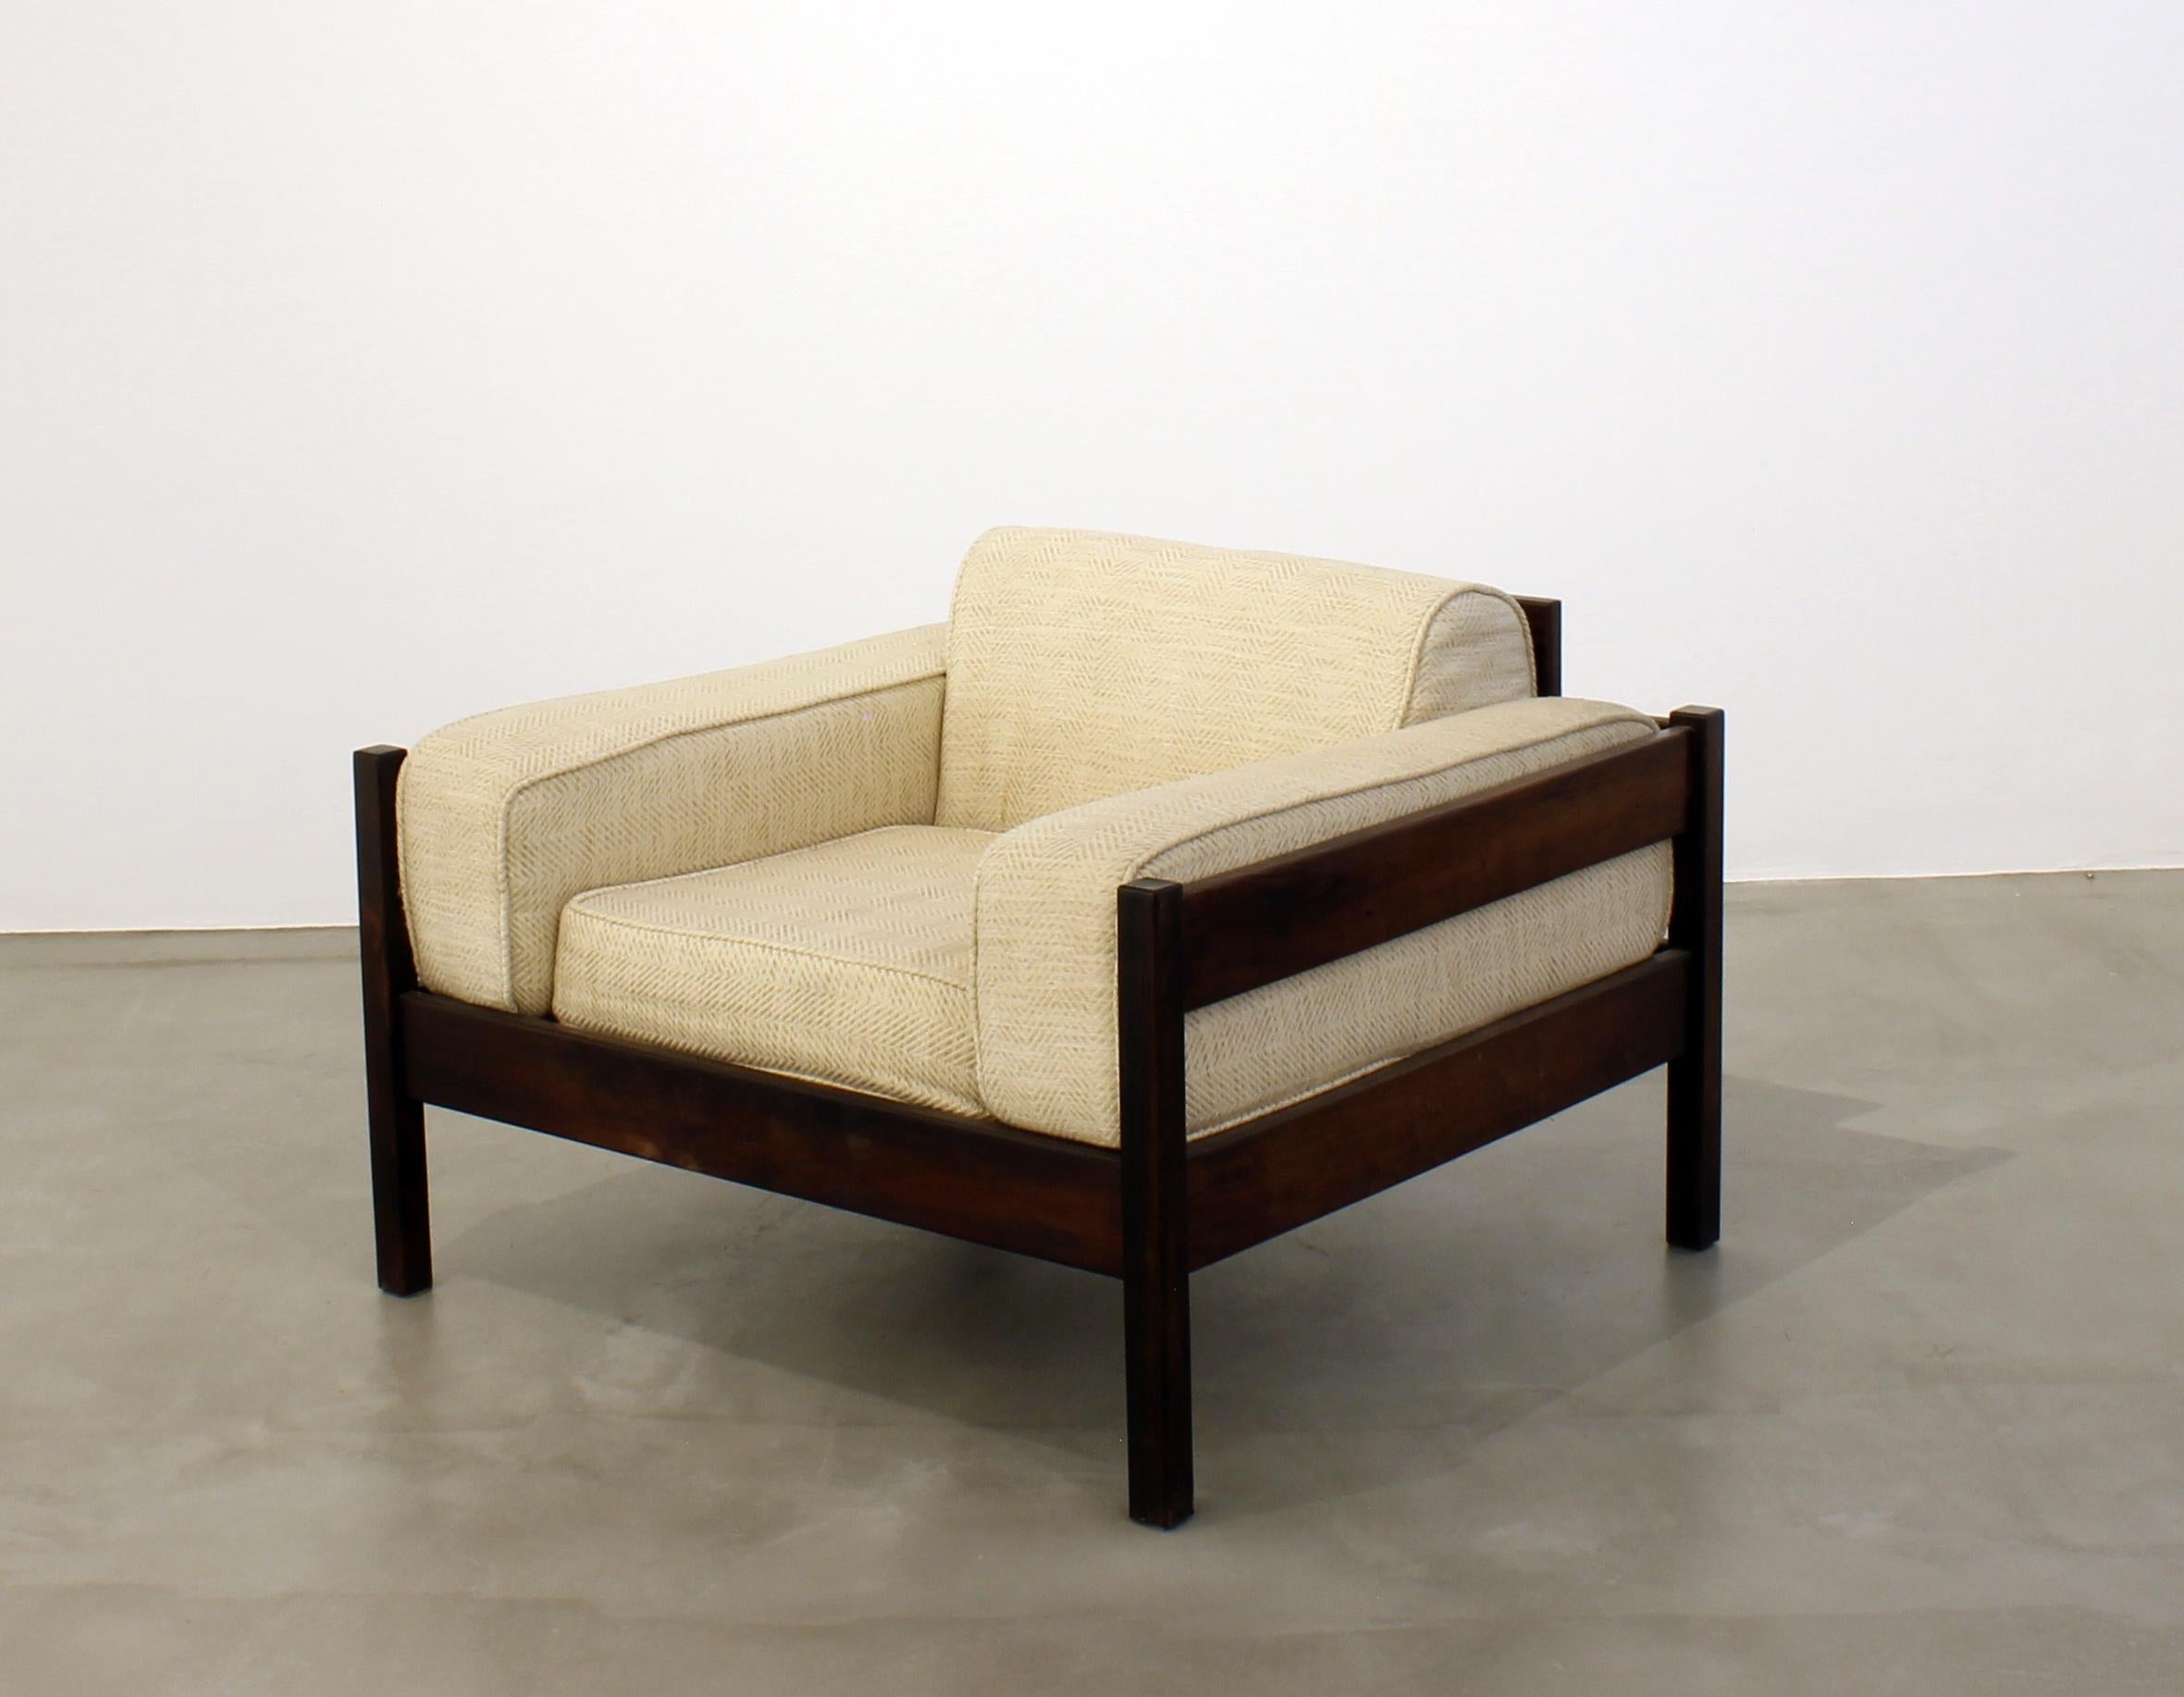 Beautiful vintage armchair by Celina Decoracoes featuring rich Brazilian wood and clean sophisticated lines.